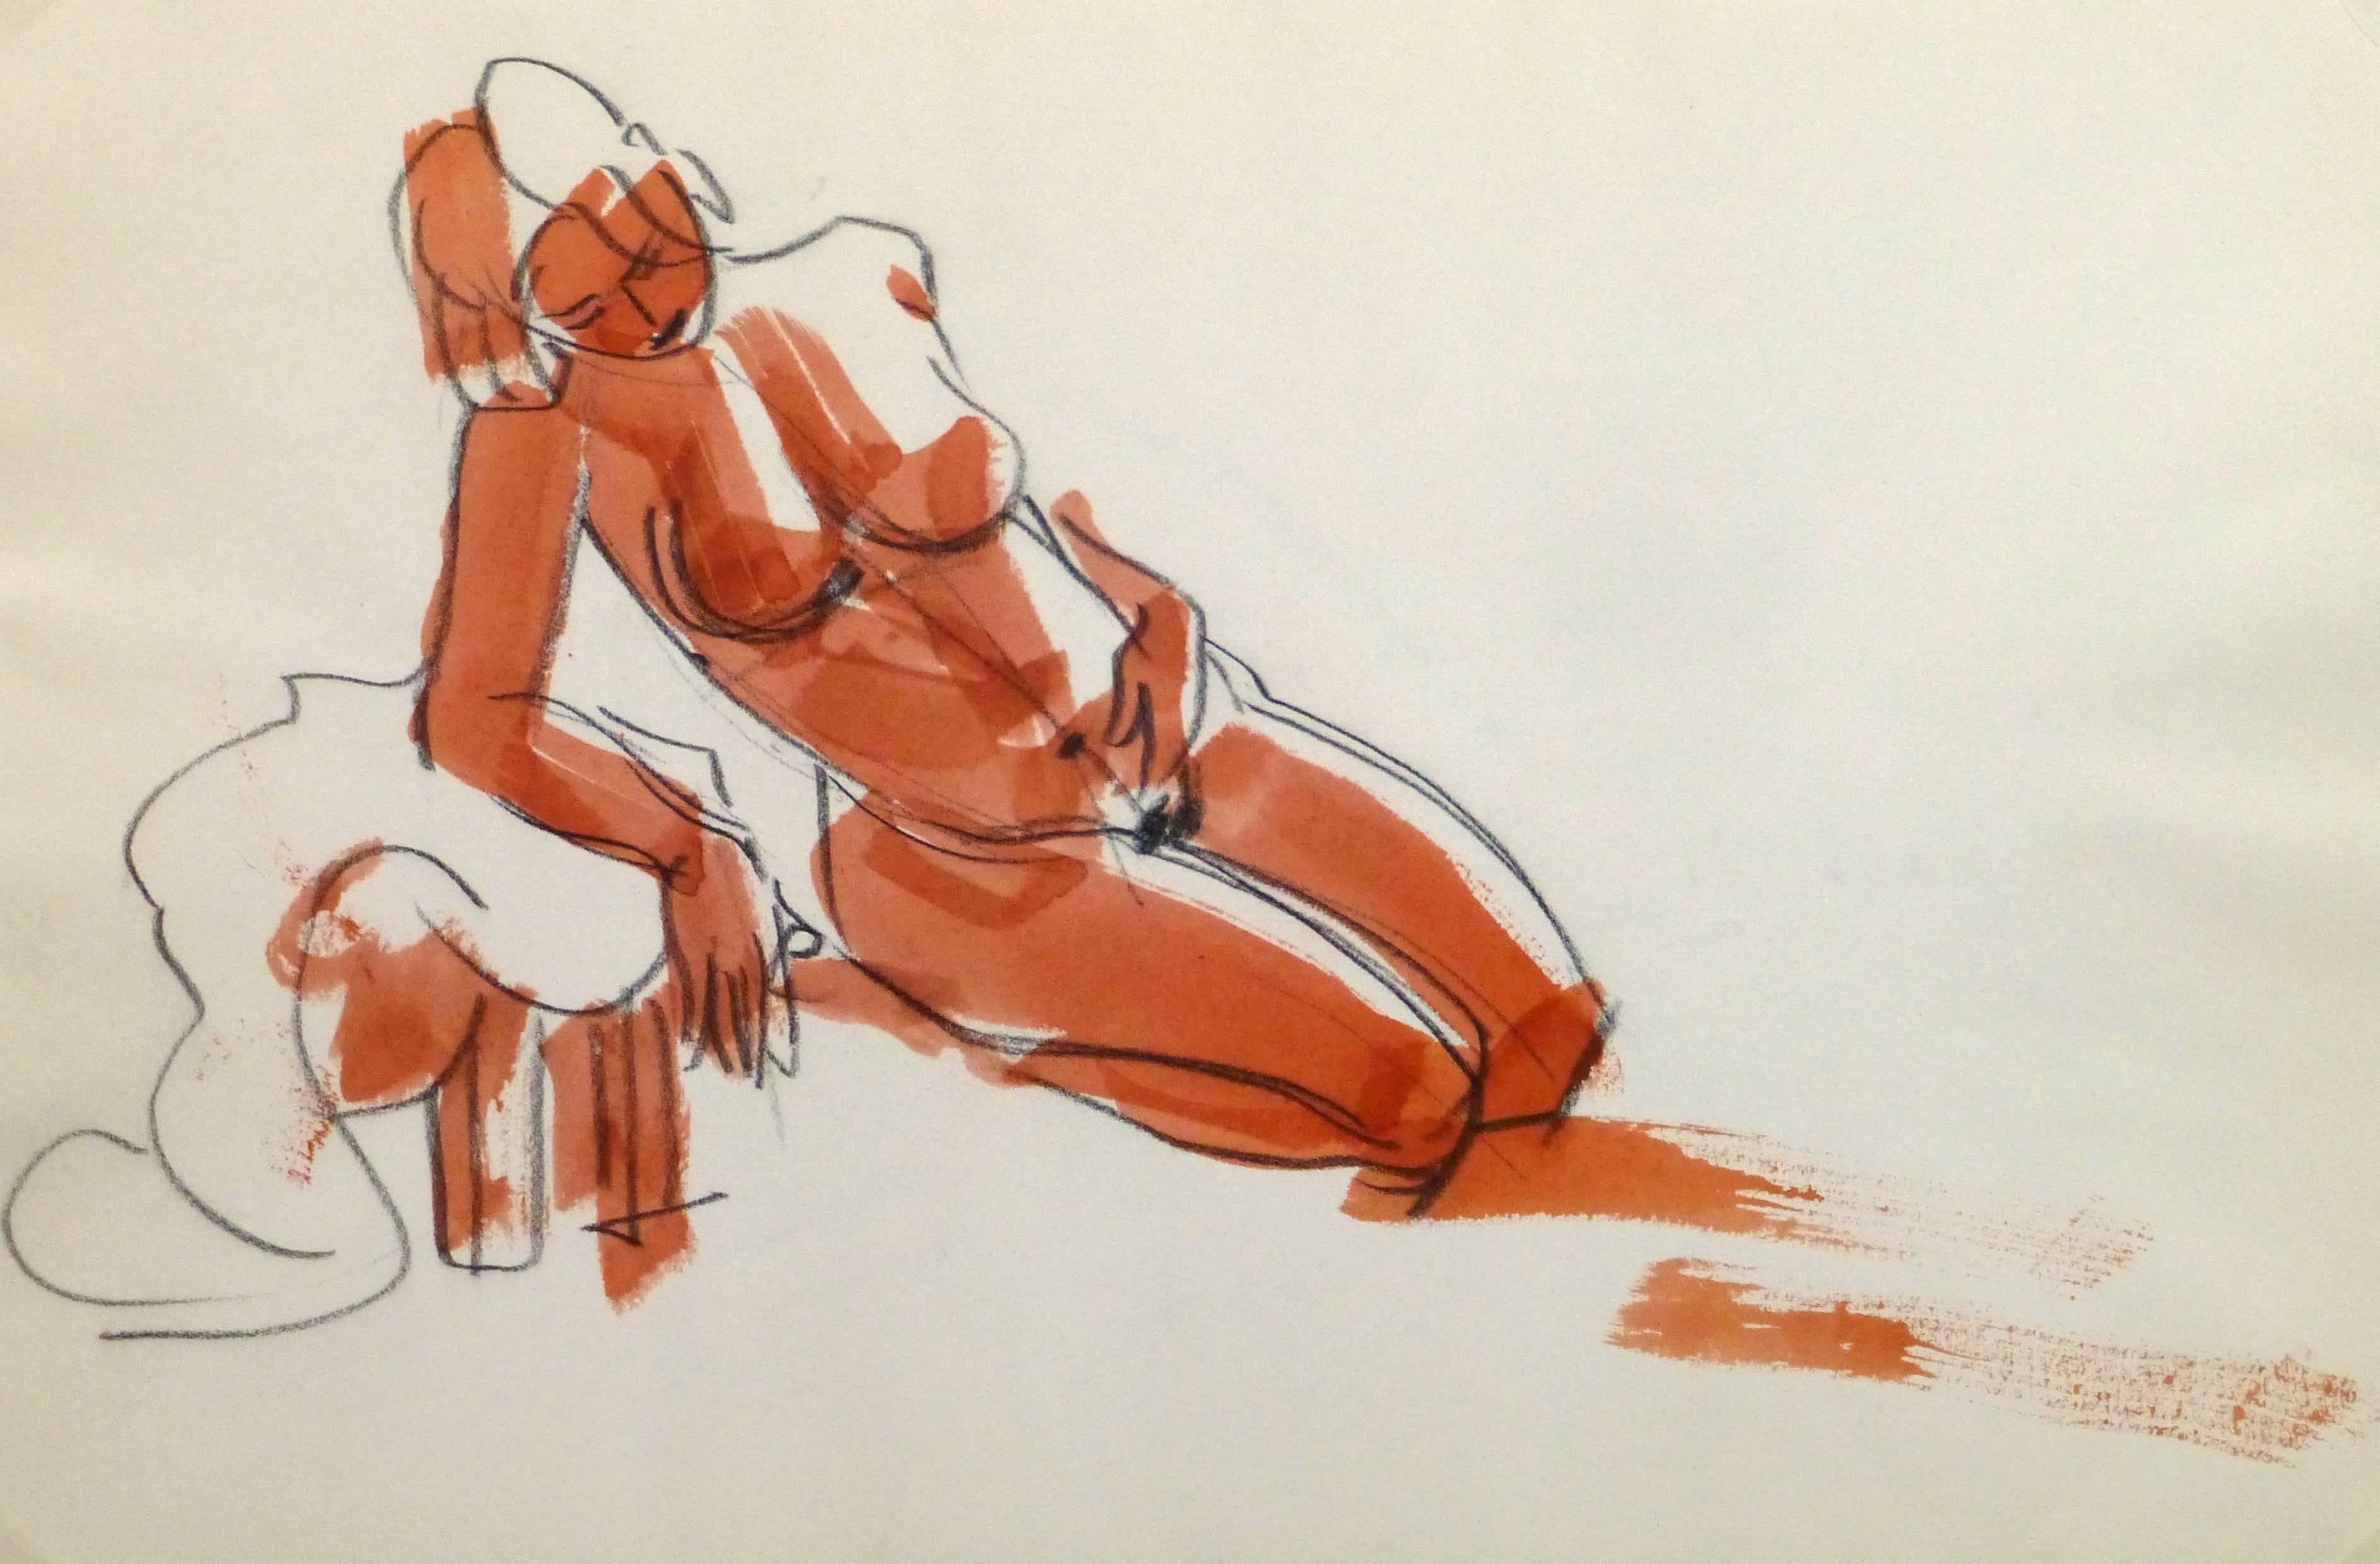 French Ink & Pencil - Sultry Nude - Art by Unknown